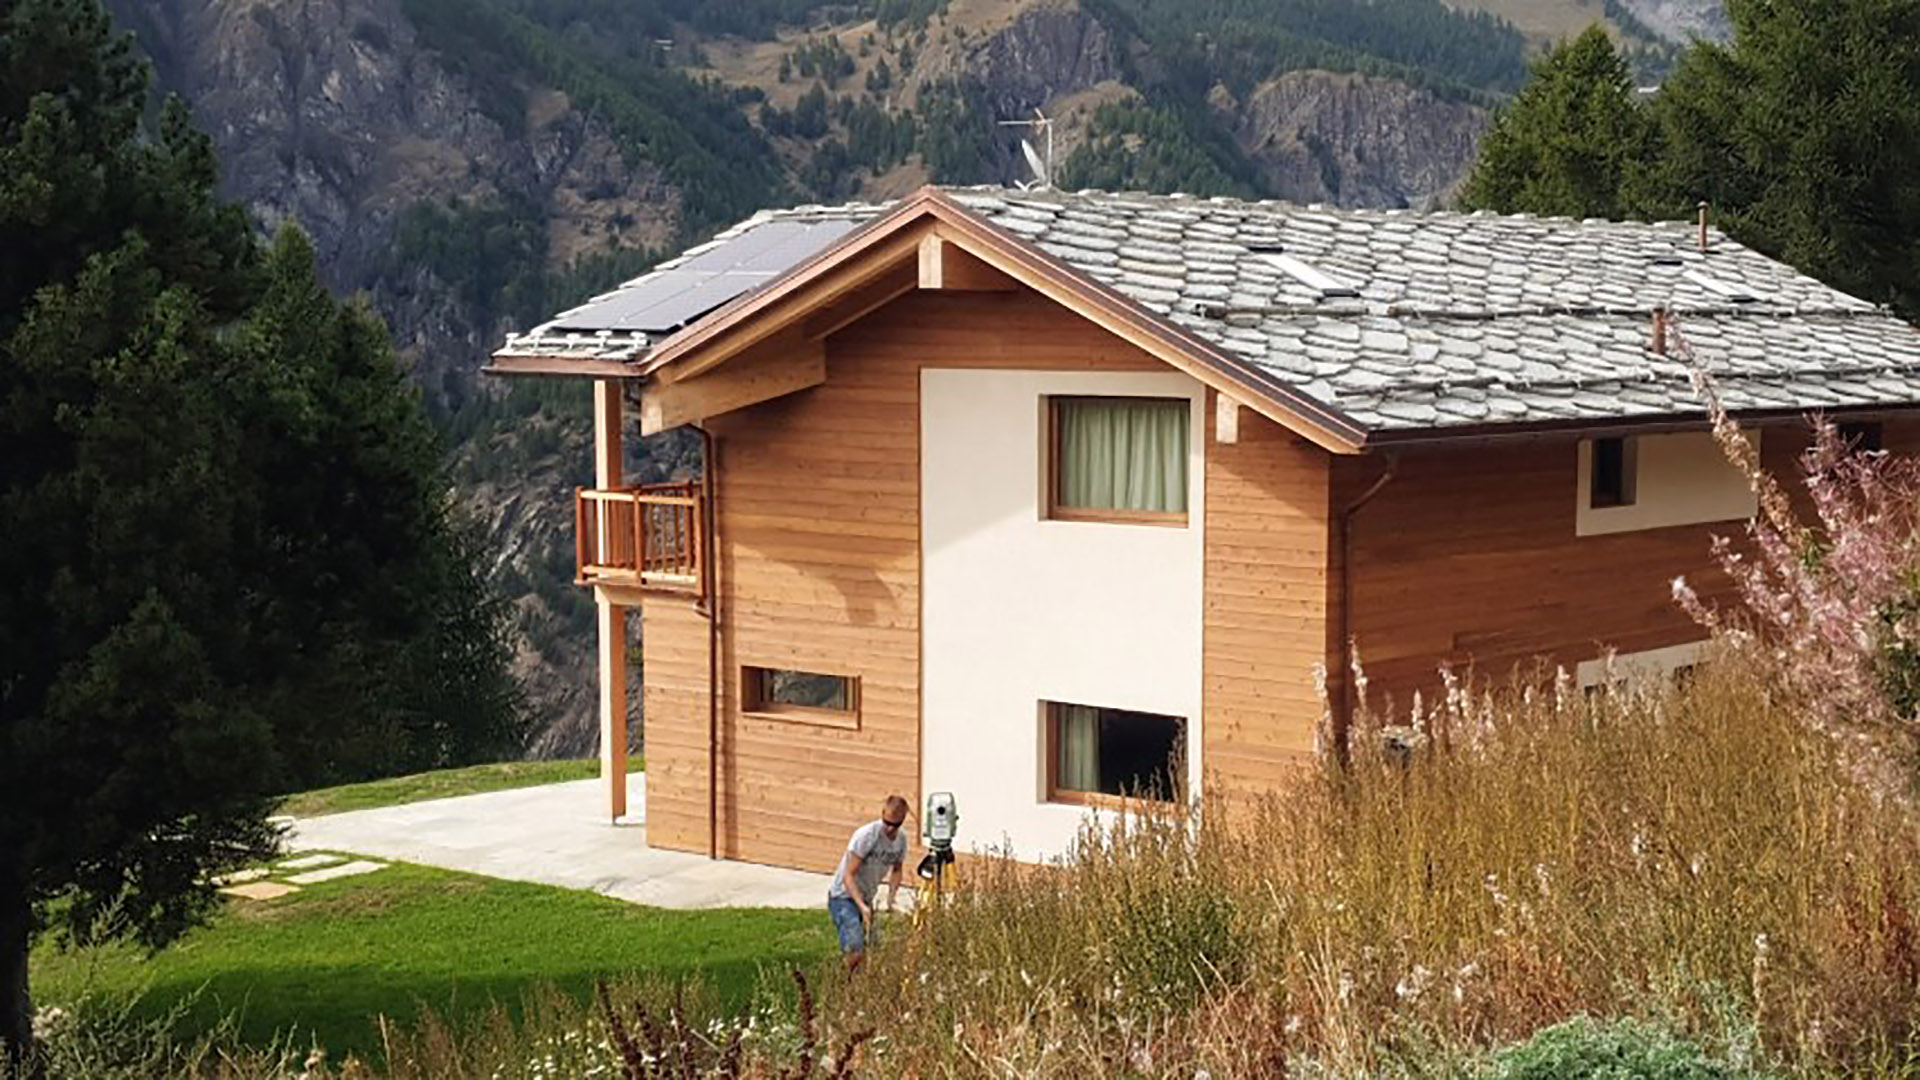 A quest for elegance and passion for an original mountain home model. An alpine villa in Chamois